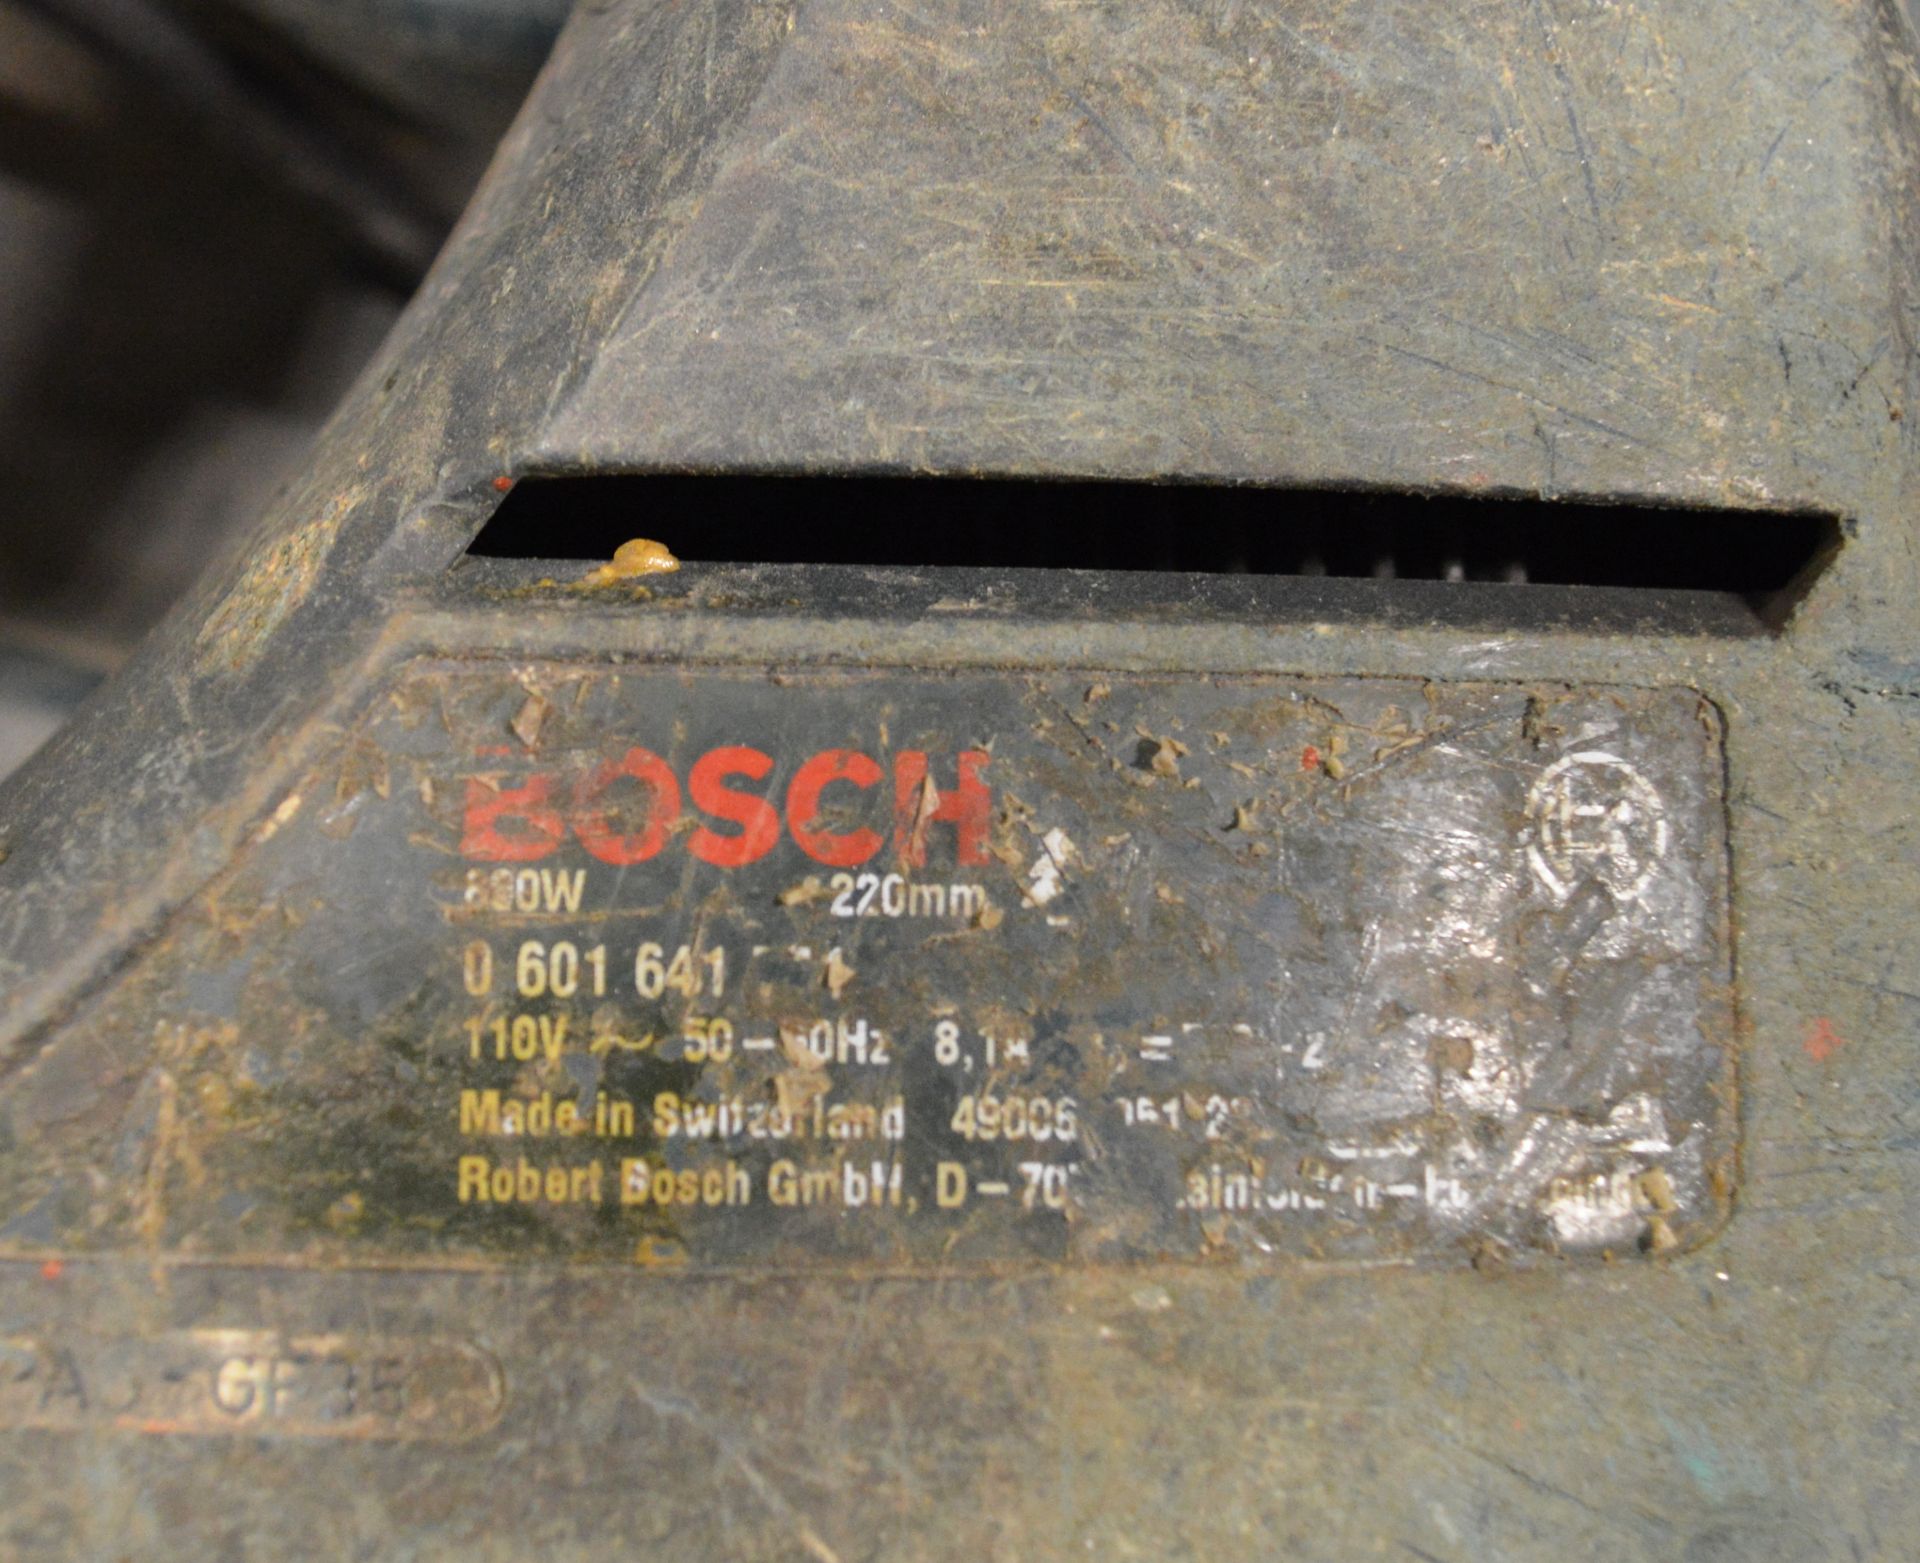 Bosch Reciprocating Saw. - Image 2 of 2